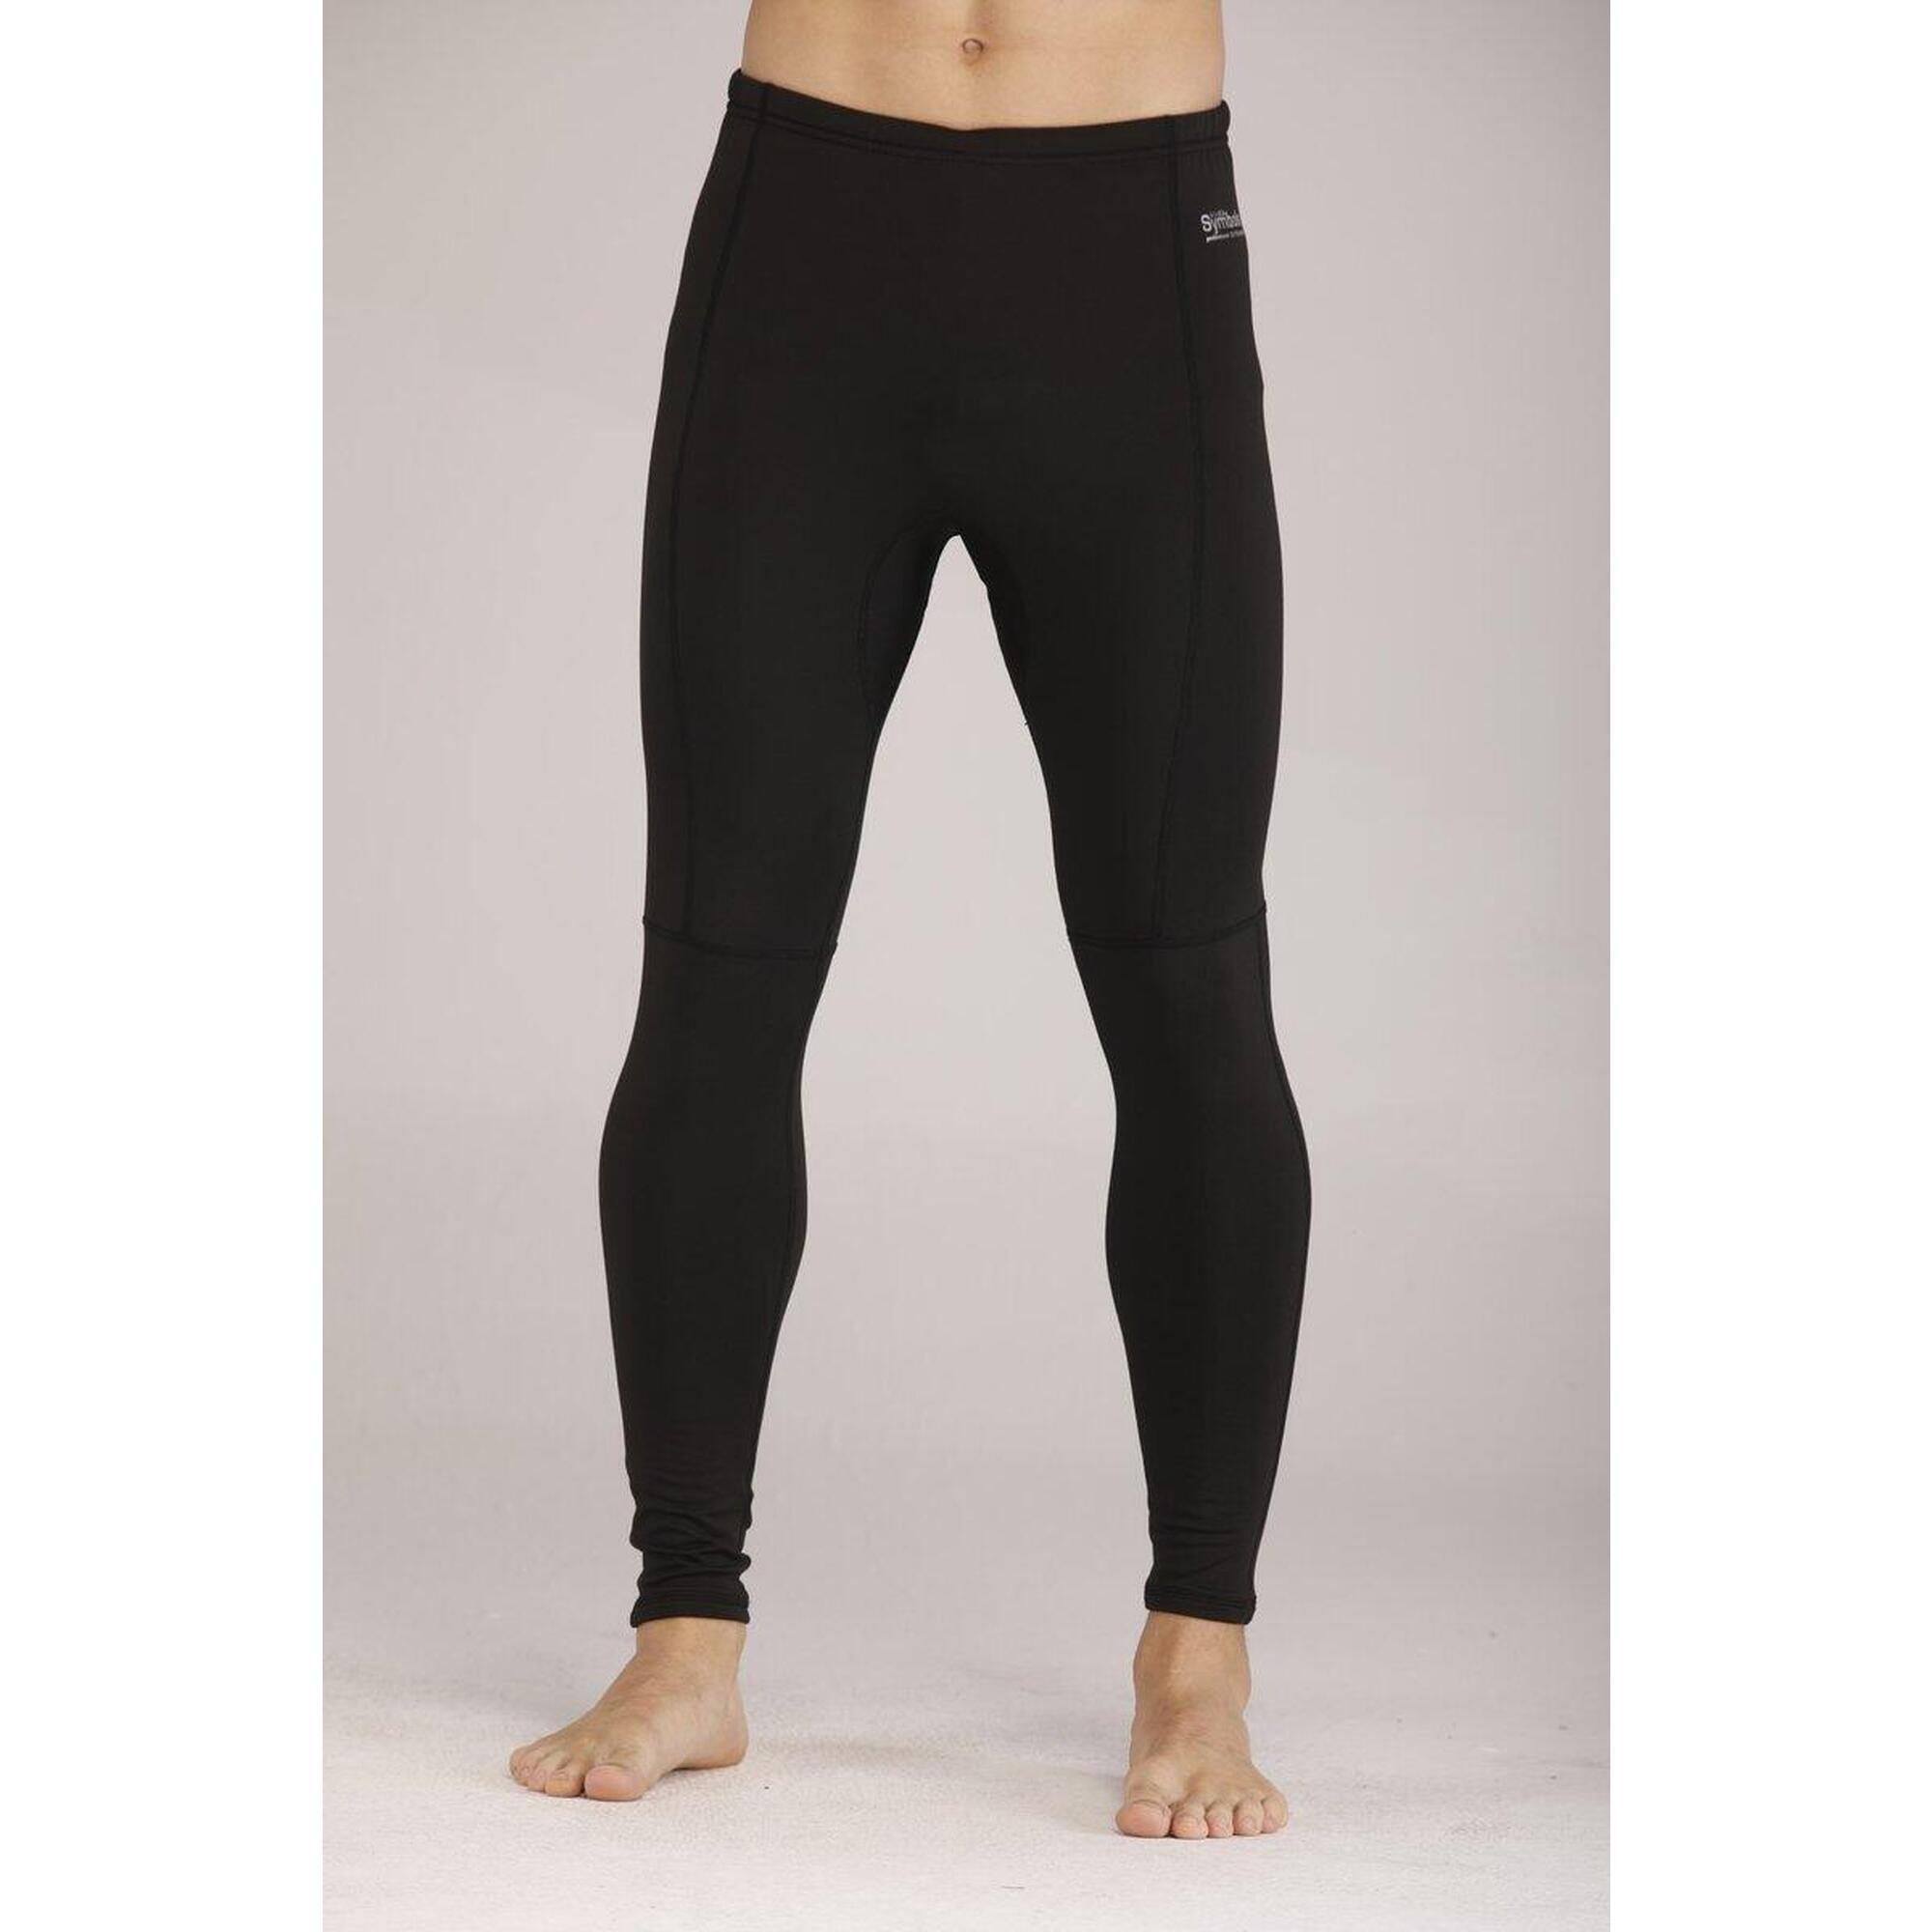 Adults 1.5mm Thick Thermal Fleece Tights - BLACK - Decathlon